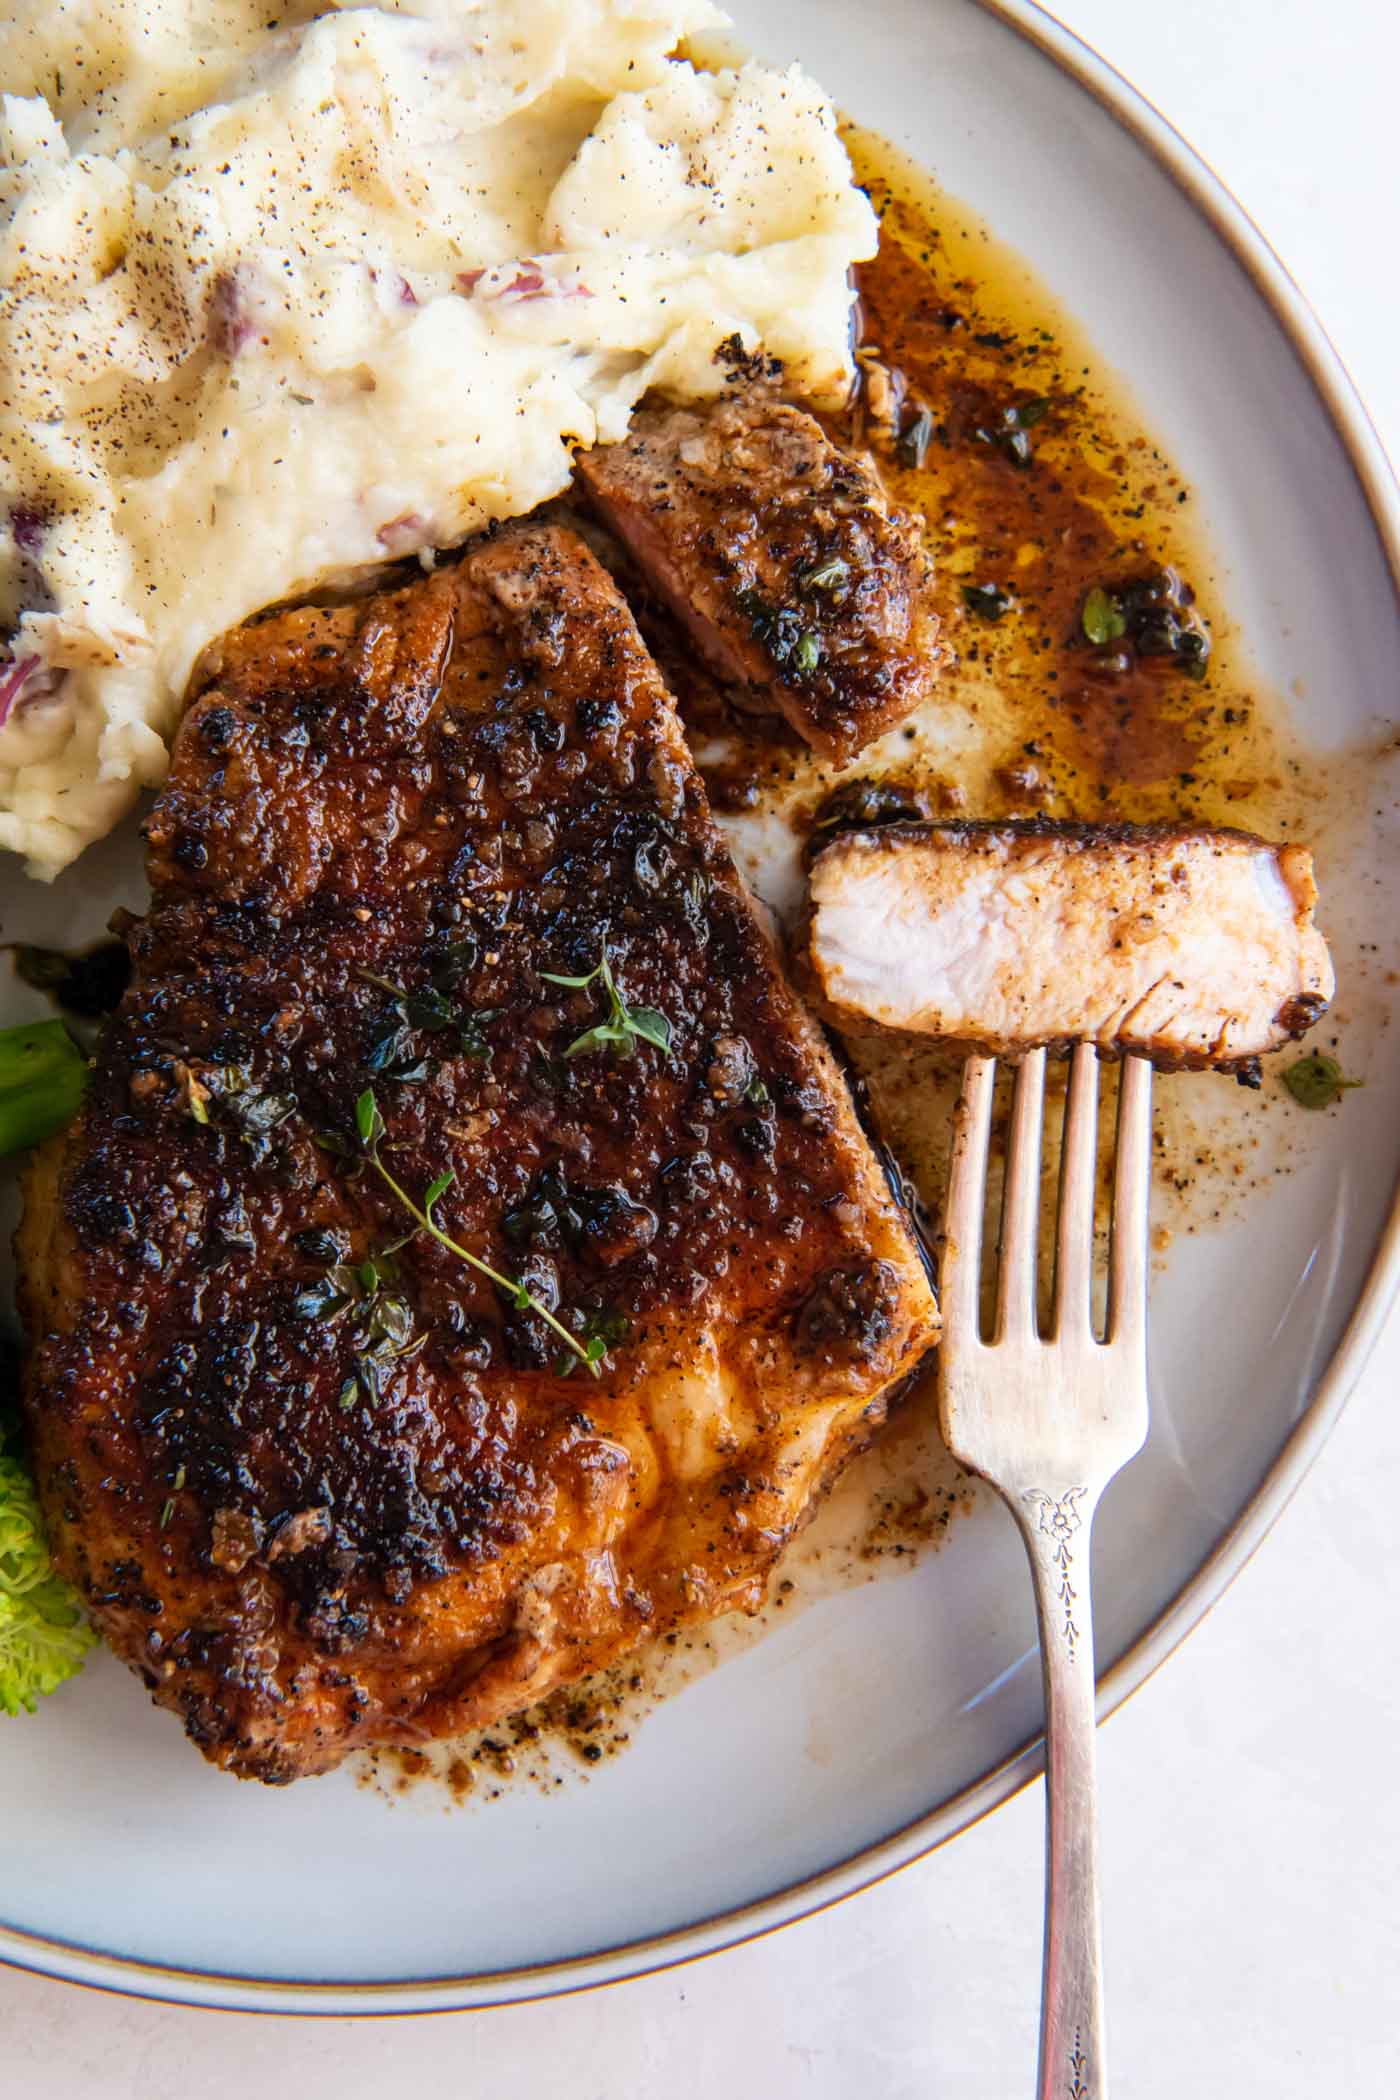 Pan fried pork chop with bite on a fork served on a plate with mashed potatoes.